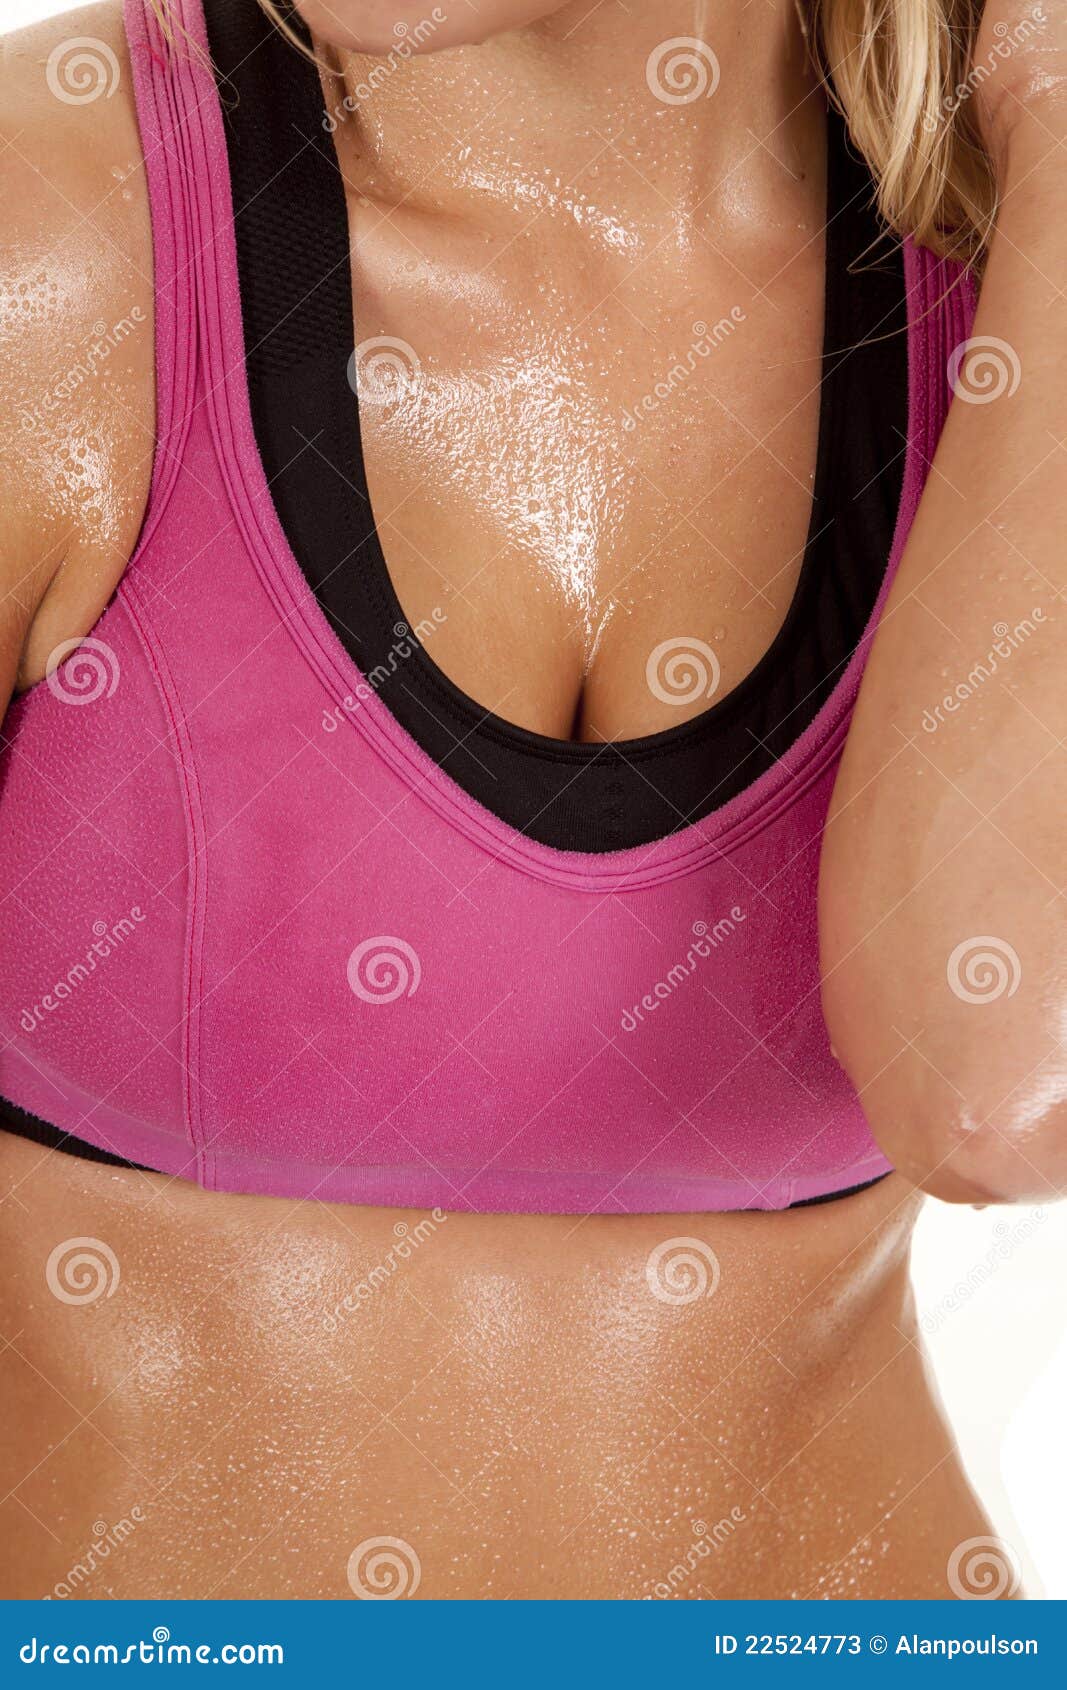 Sweaty woman bust stock image. Image of person, curves - 22524773